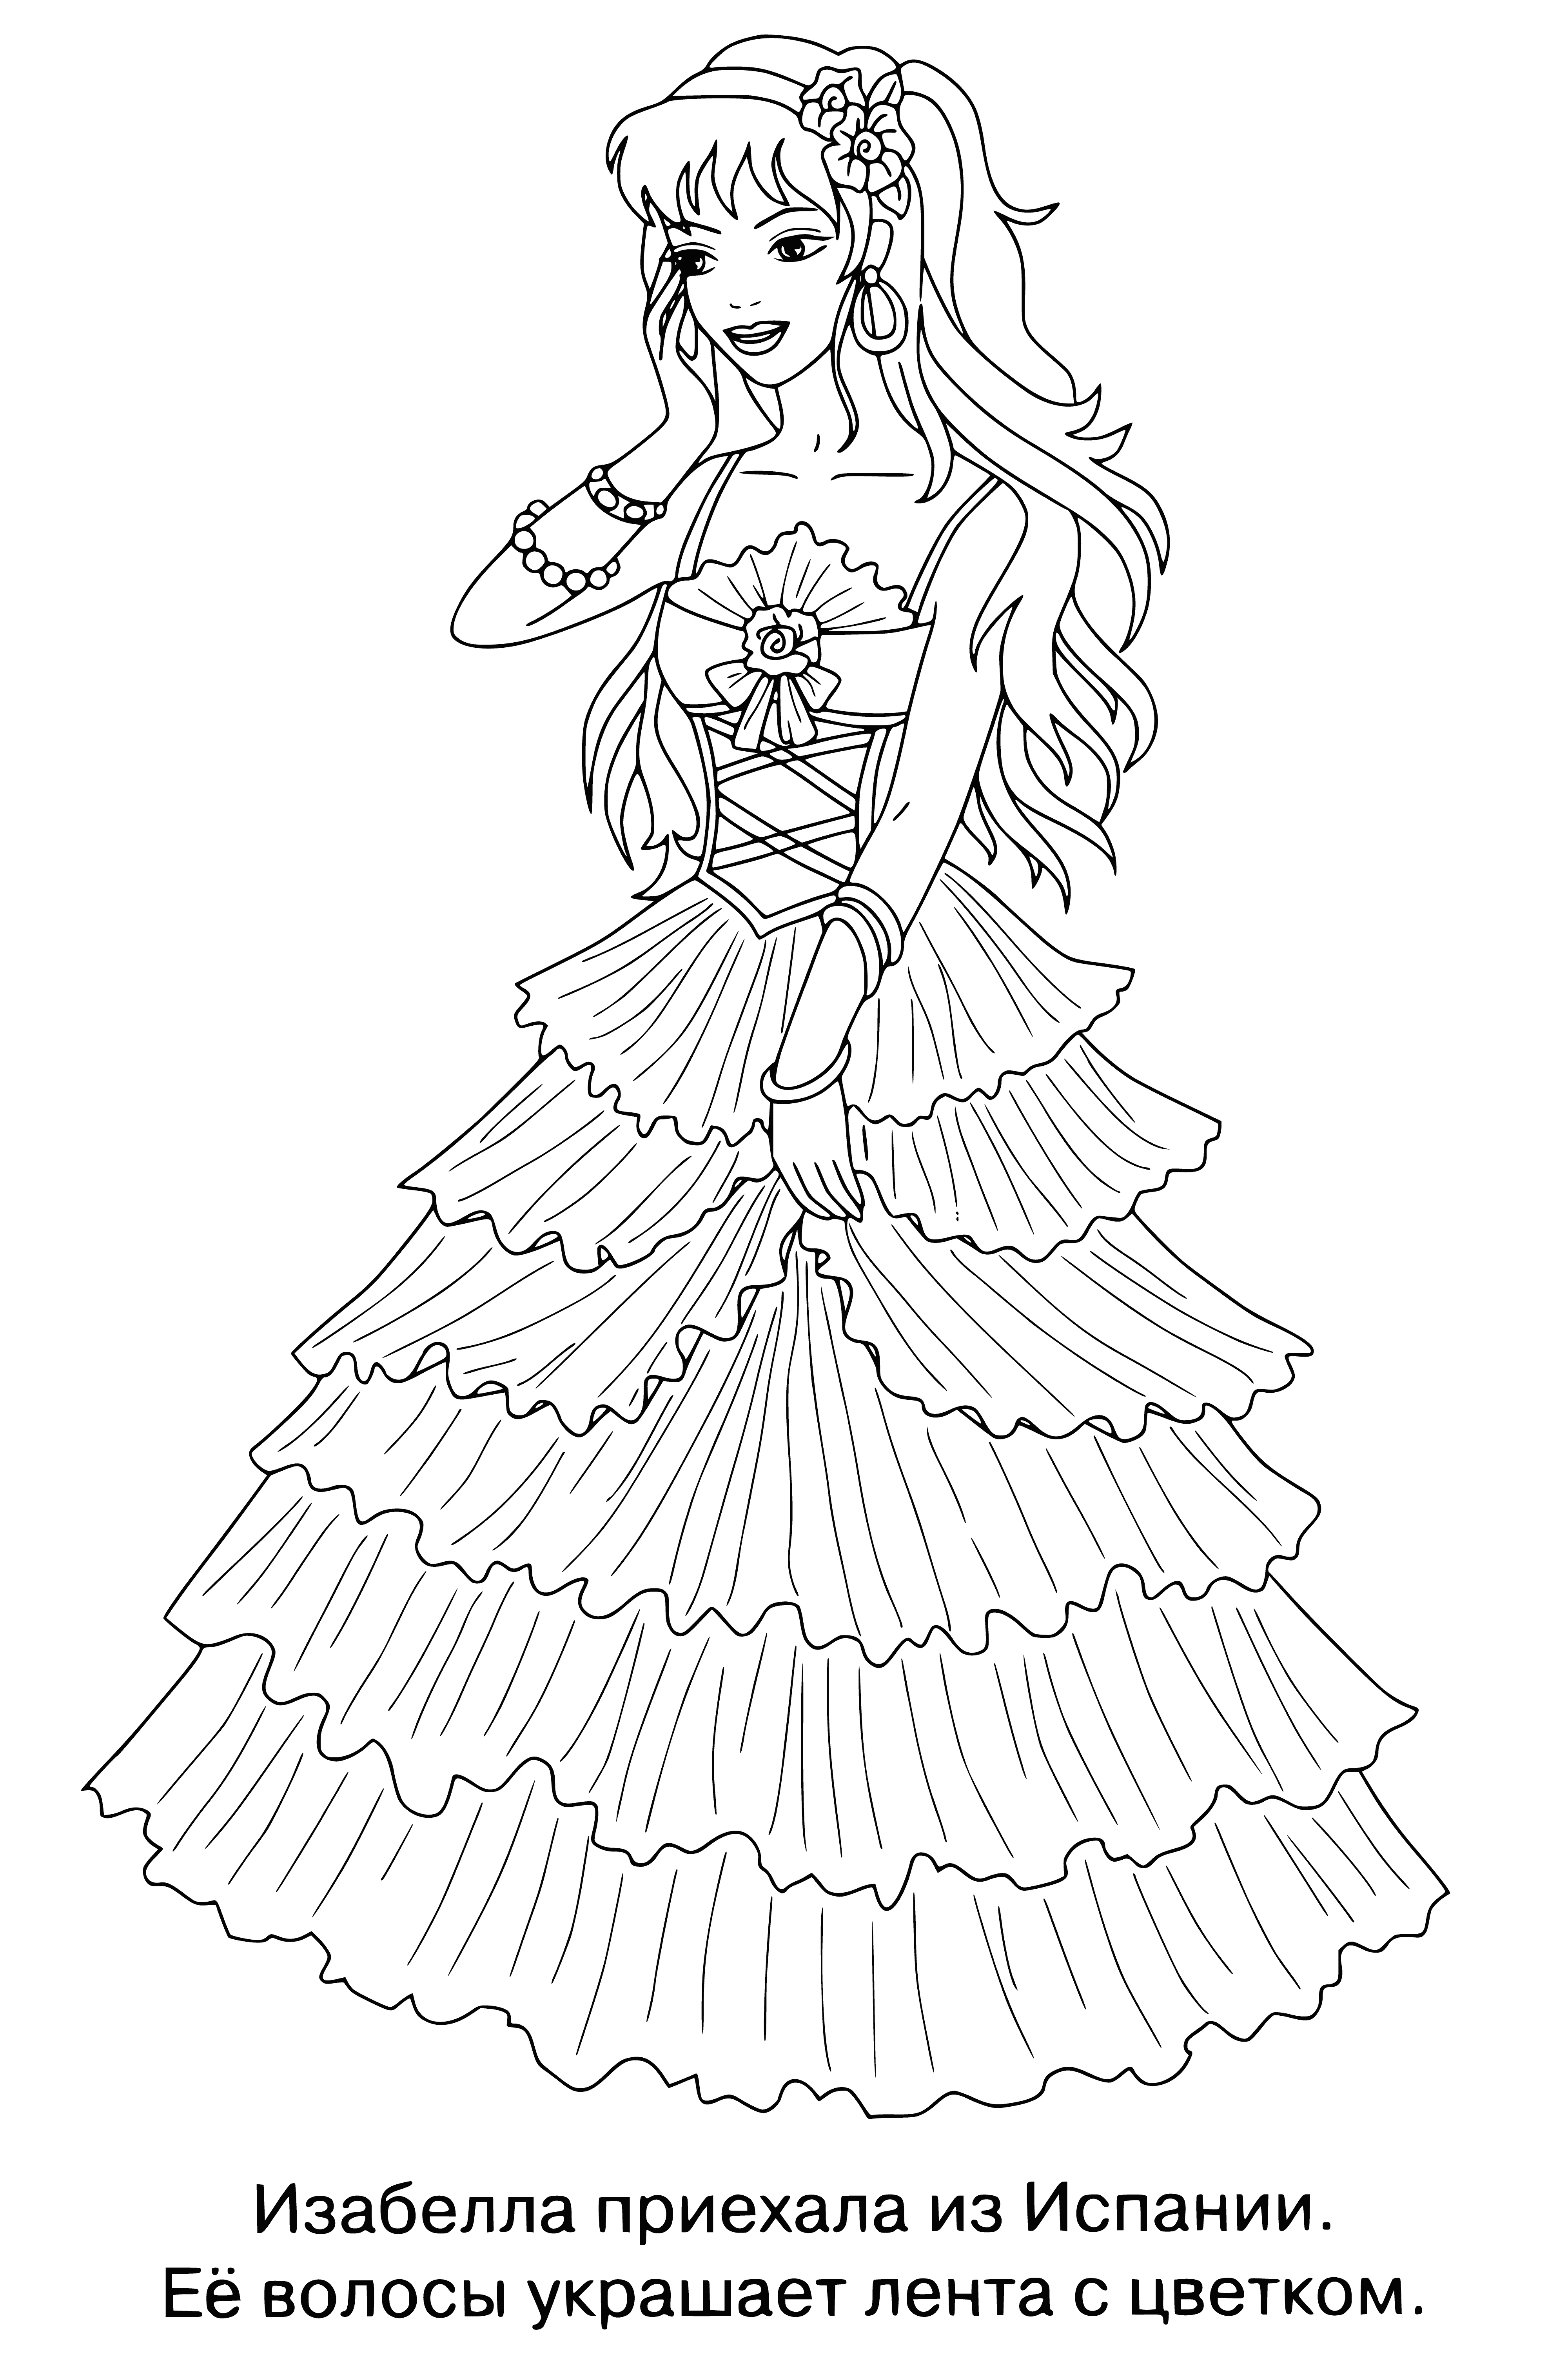 coloring page: Princess in pink dress and crown stands in a garden, surrounded by flowers. #coloringpage